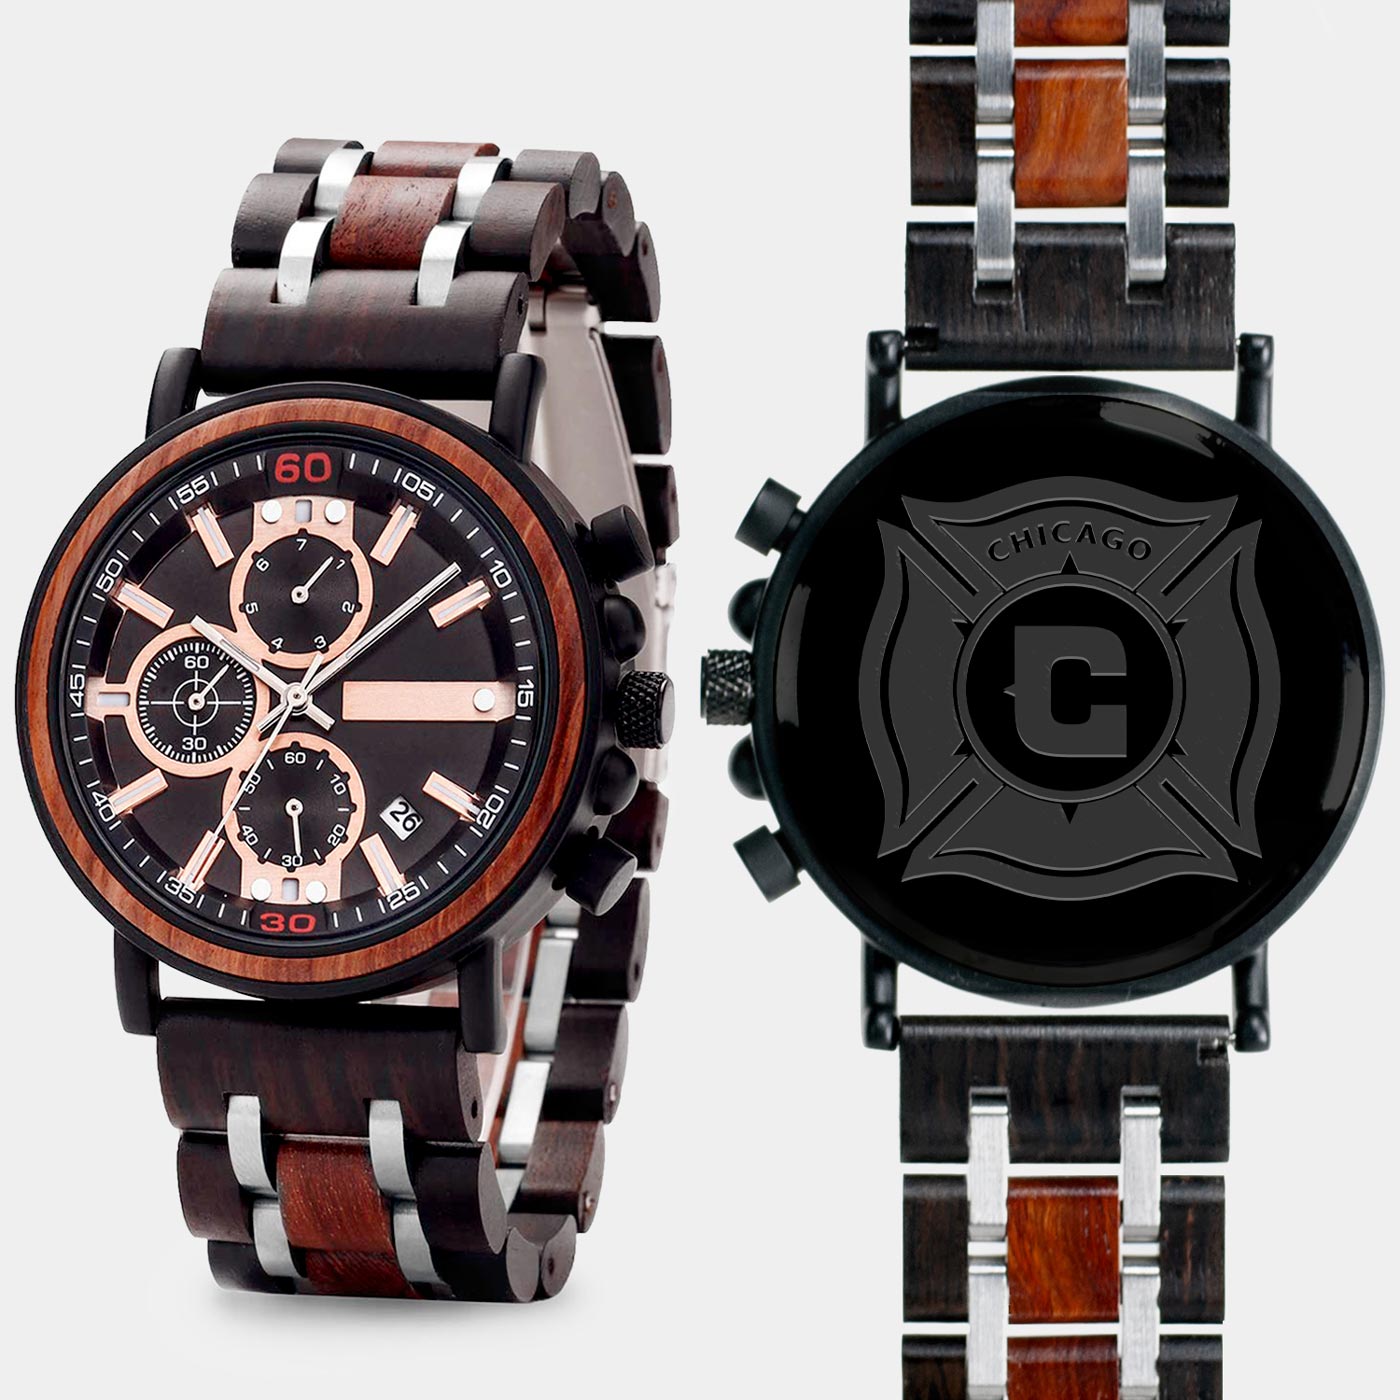 Chicago Fire SC Mens Wrist Watch  - Personalized Chicago Fire SC Mens Watches - Custom Gifts For Him, Birthday Gifts, Gift For Dad - Best 2022 Chicago Fire SC Christmas Gifts - Black 45mm MLS Wood Watch - By Engraved In Nature